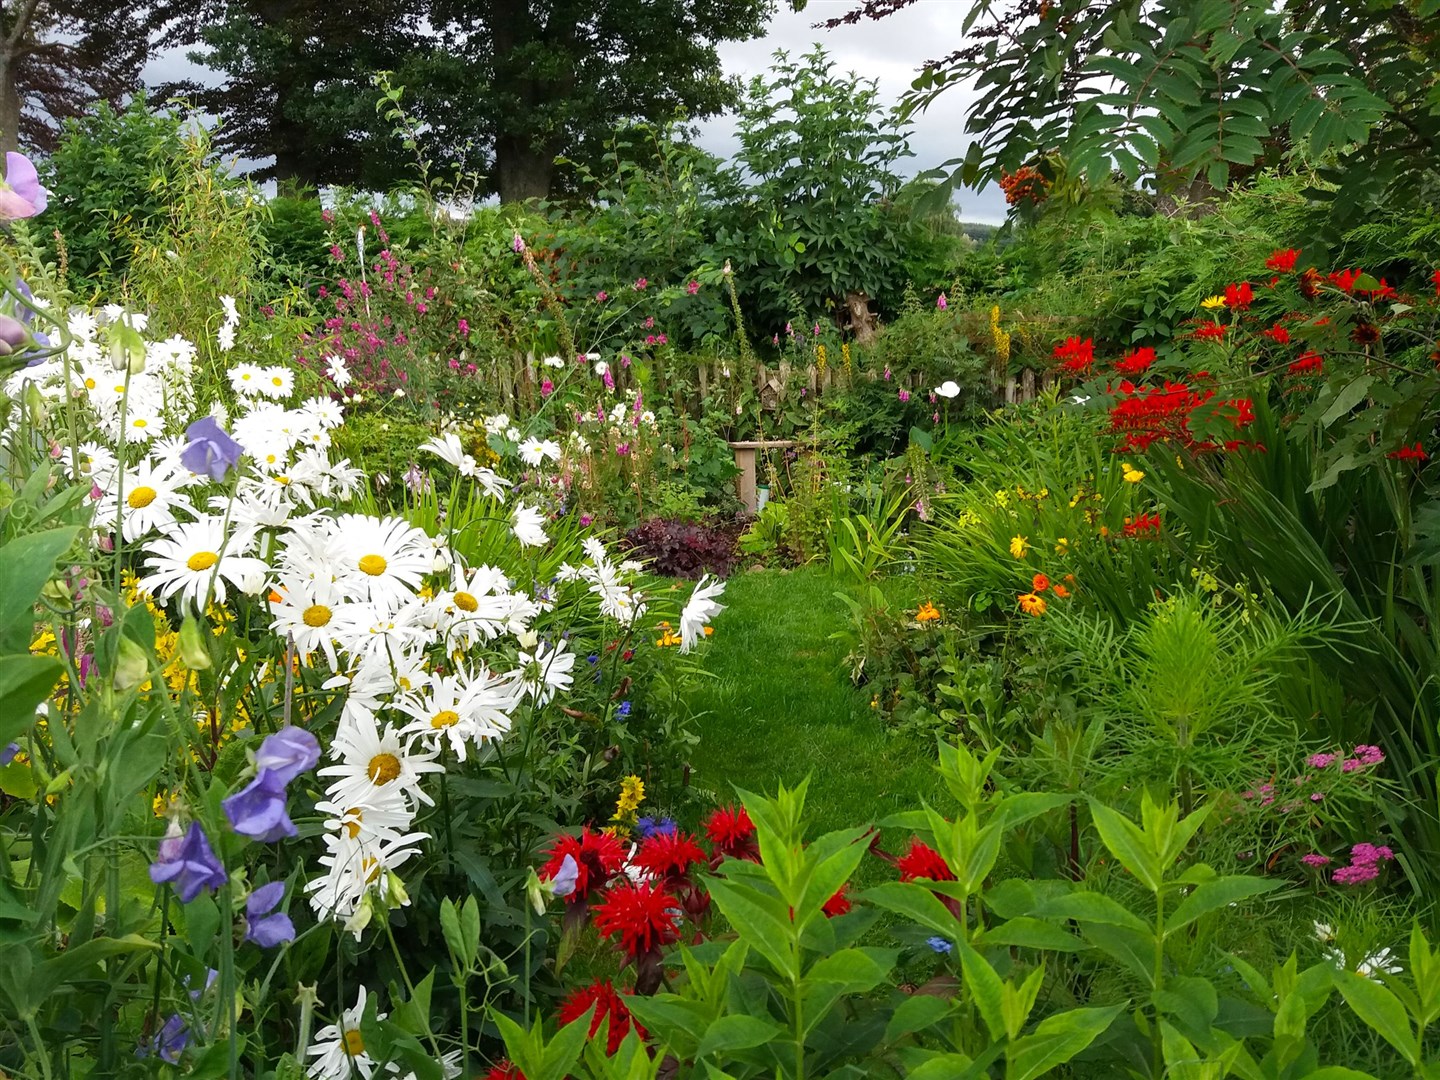 The garden at 3 Burgie Mains – 'a place where cultivated and wild meet'.